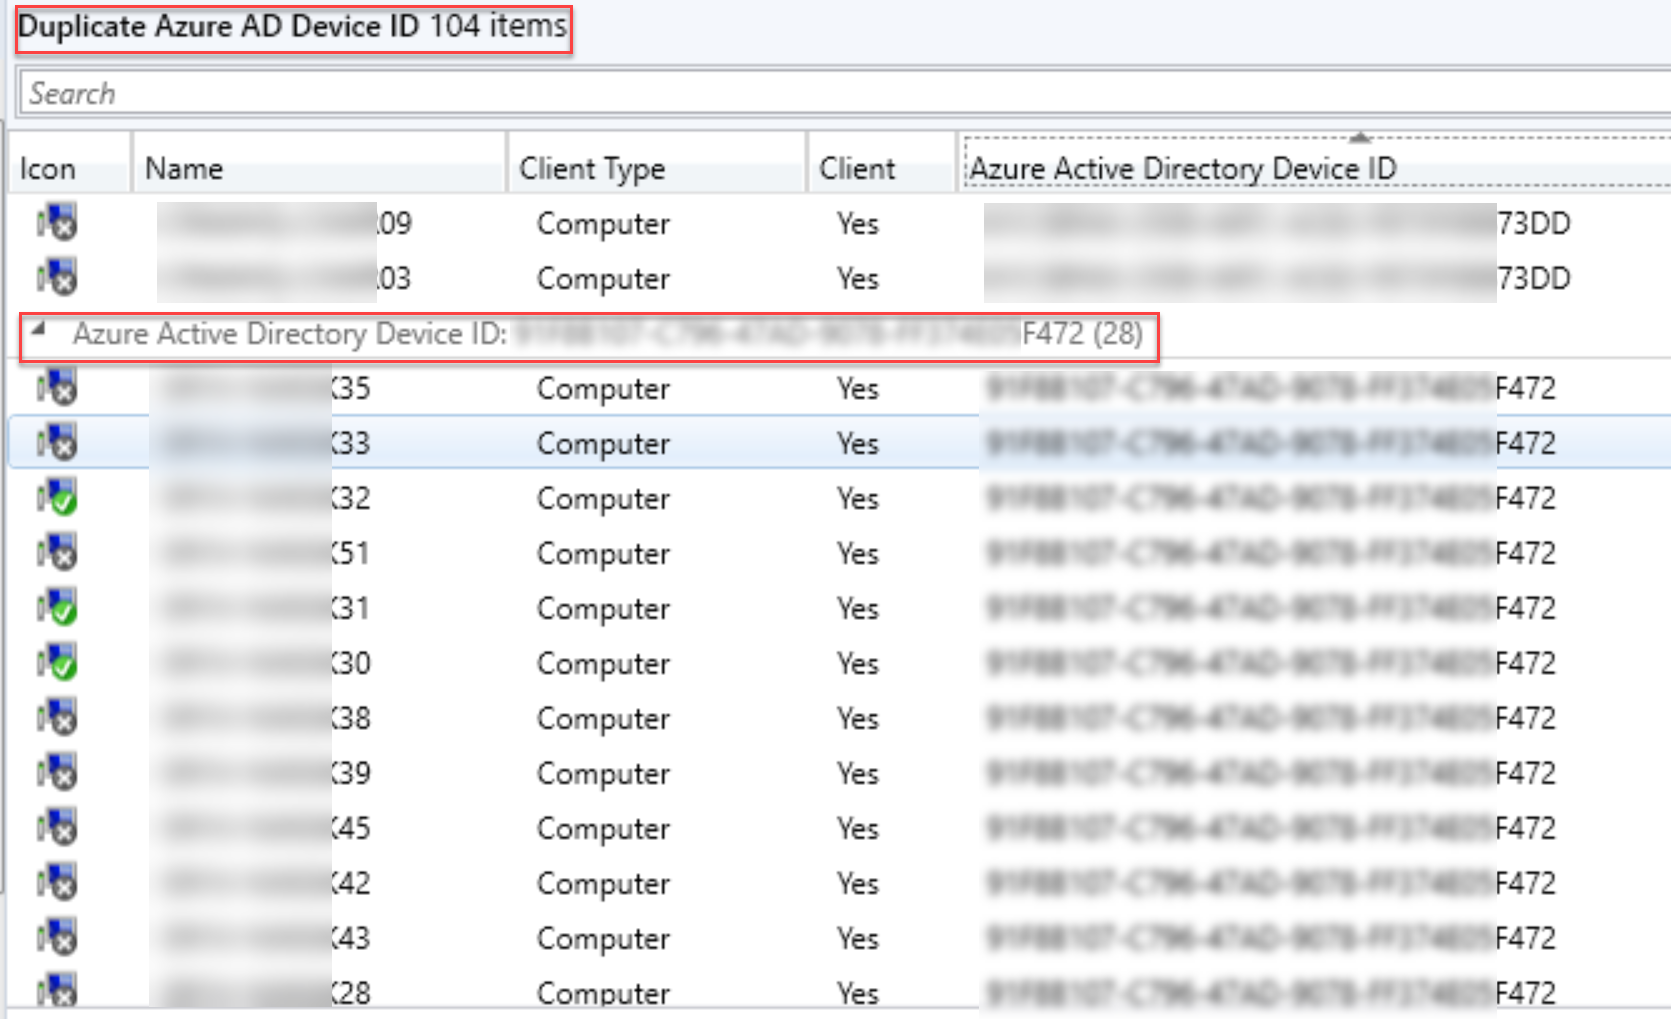 Grouped by Azure Active Directory Device ID